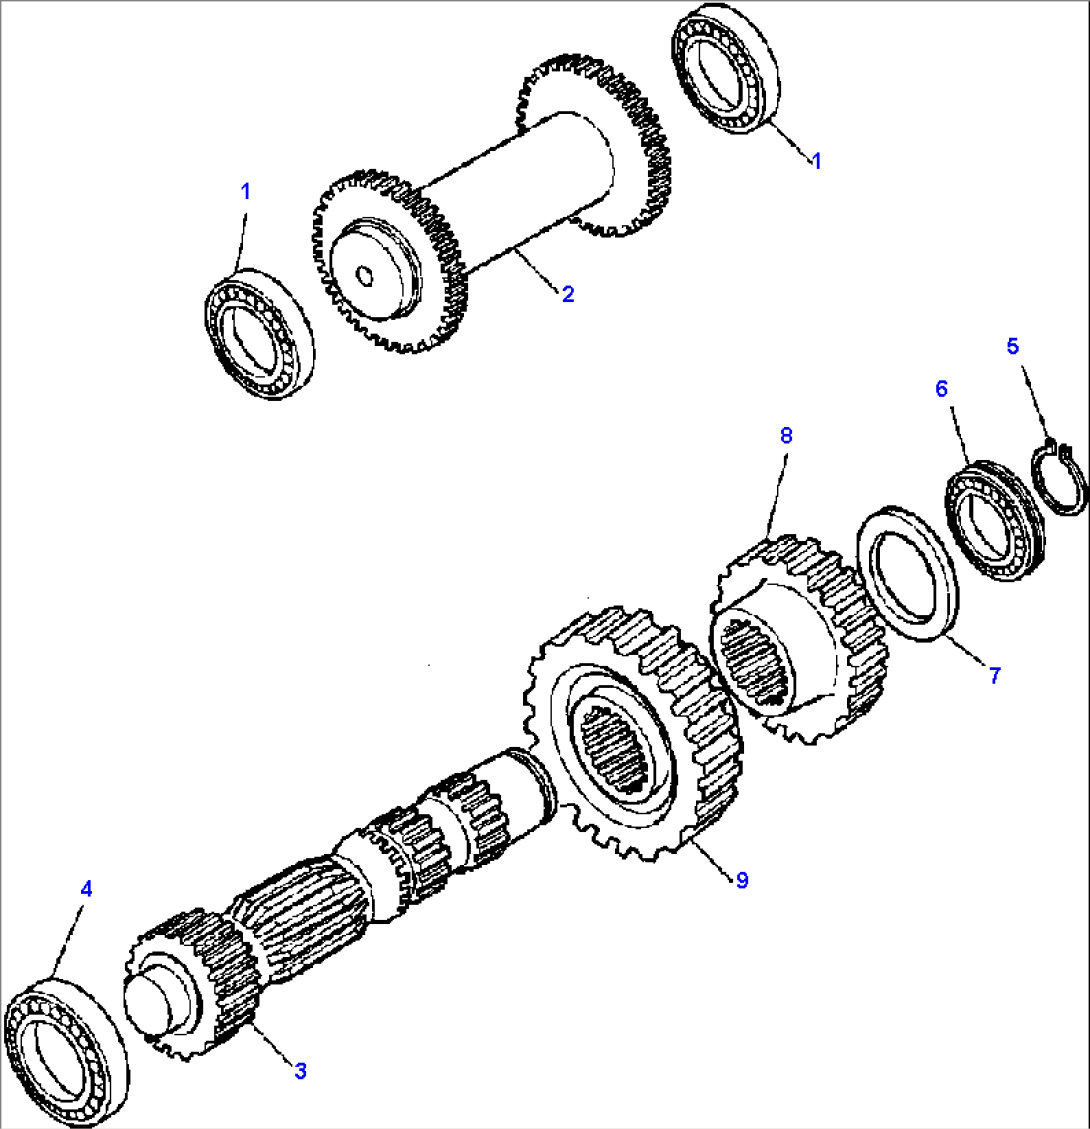 FIG. F3310-01A0 TRANSMISSION (2WD) - PRIMARY AND REVERSE SHAFT AND GEAR